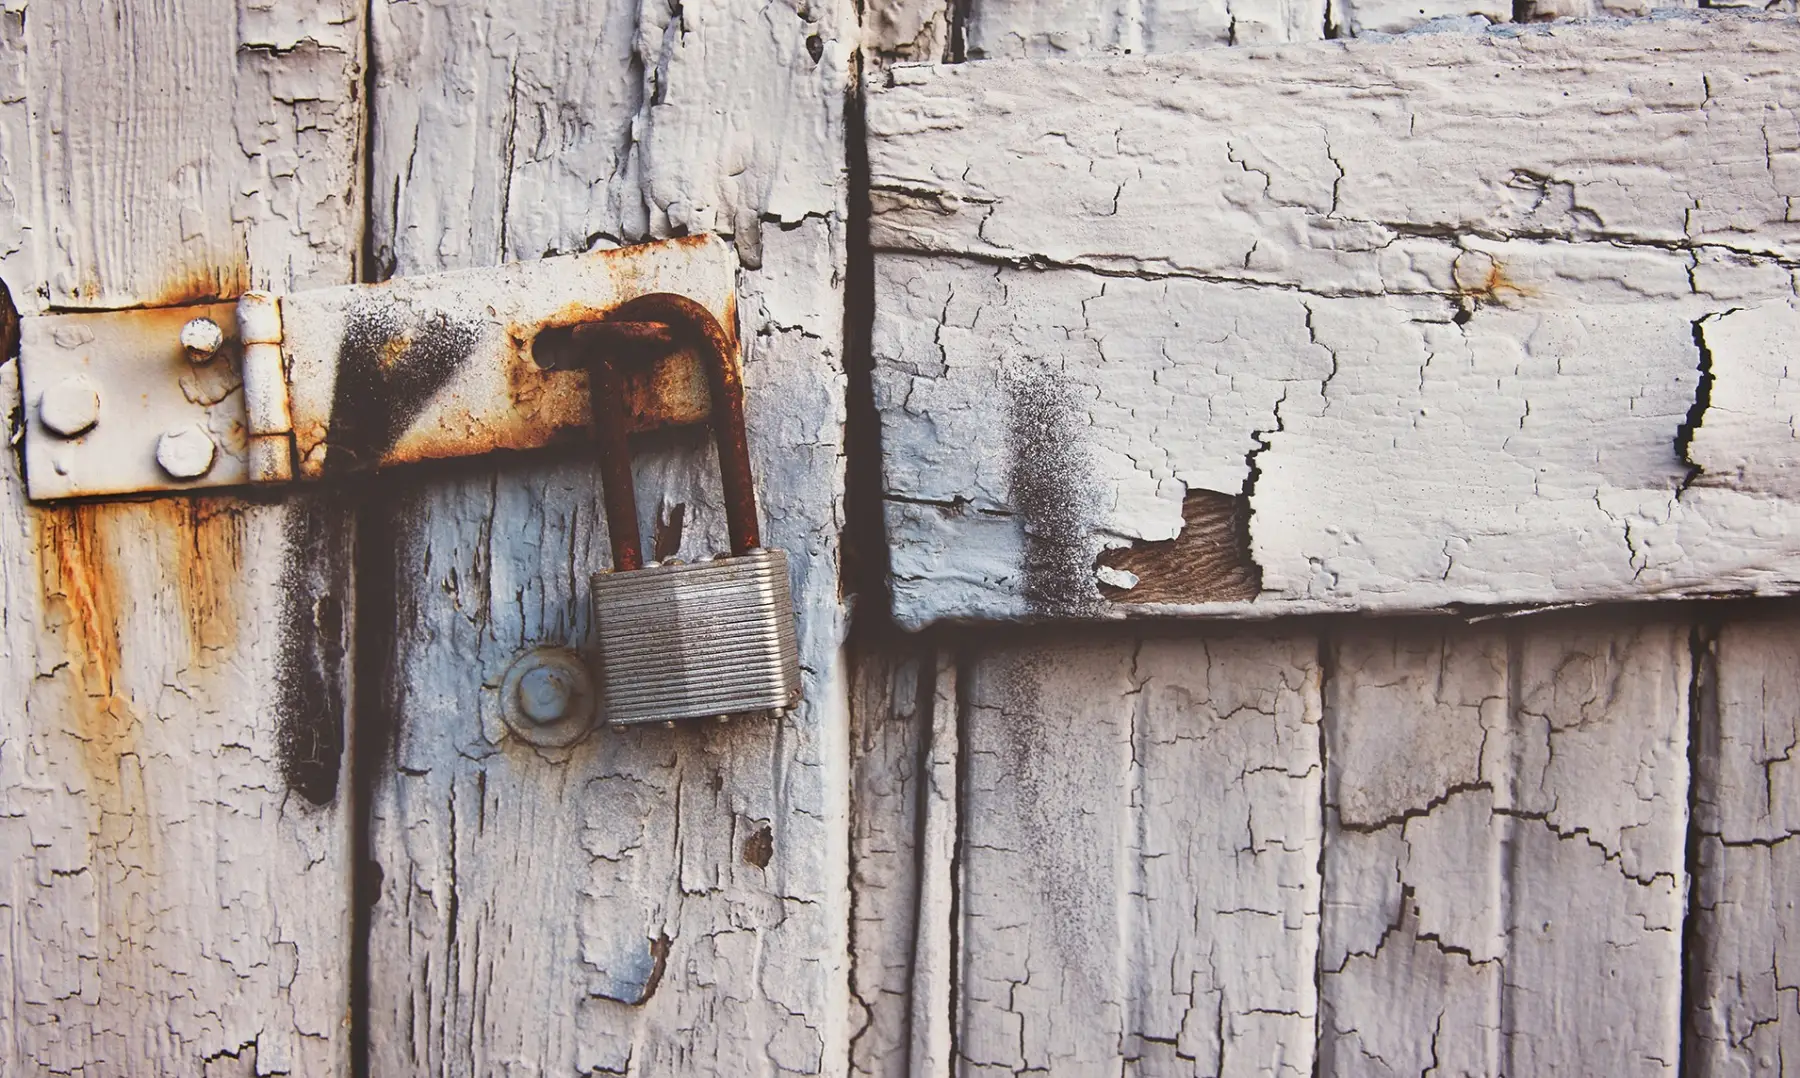 Padlock on old gate with flaky paint